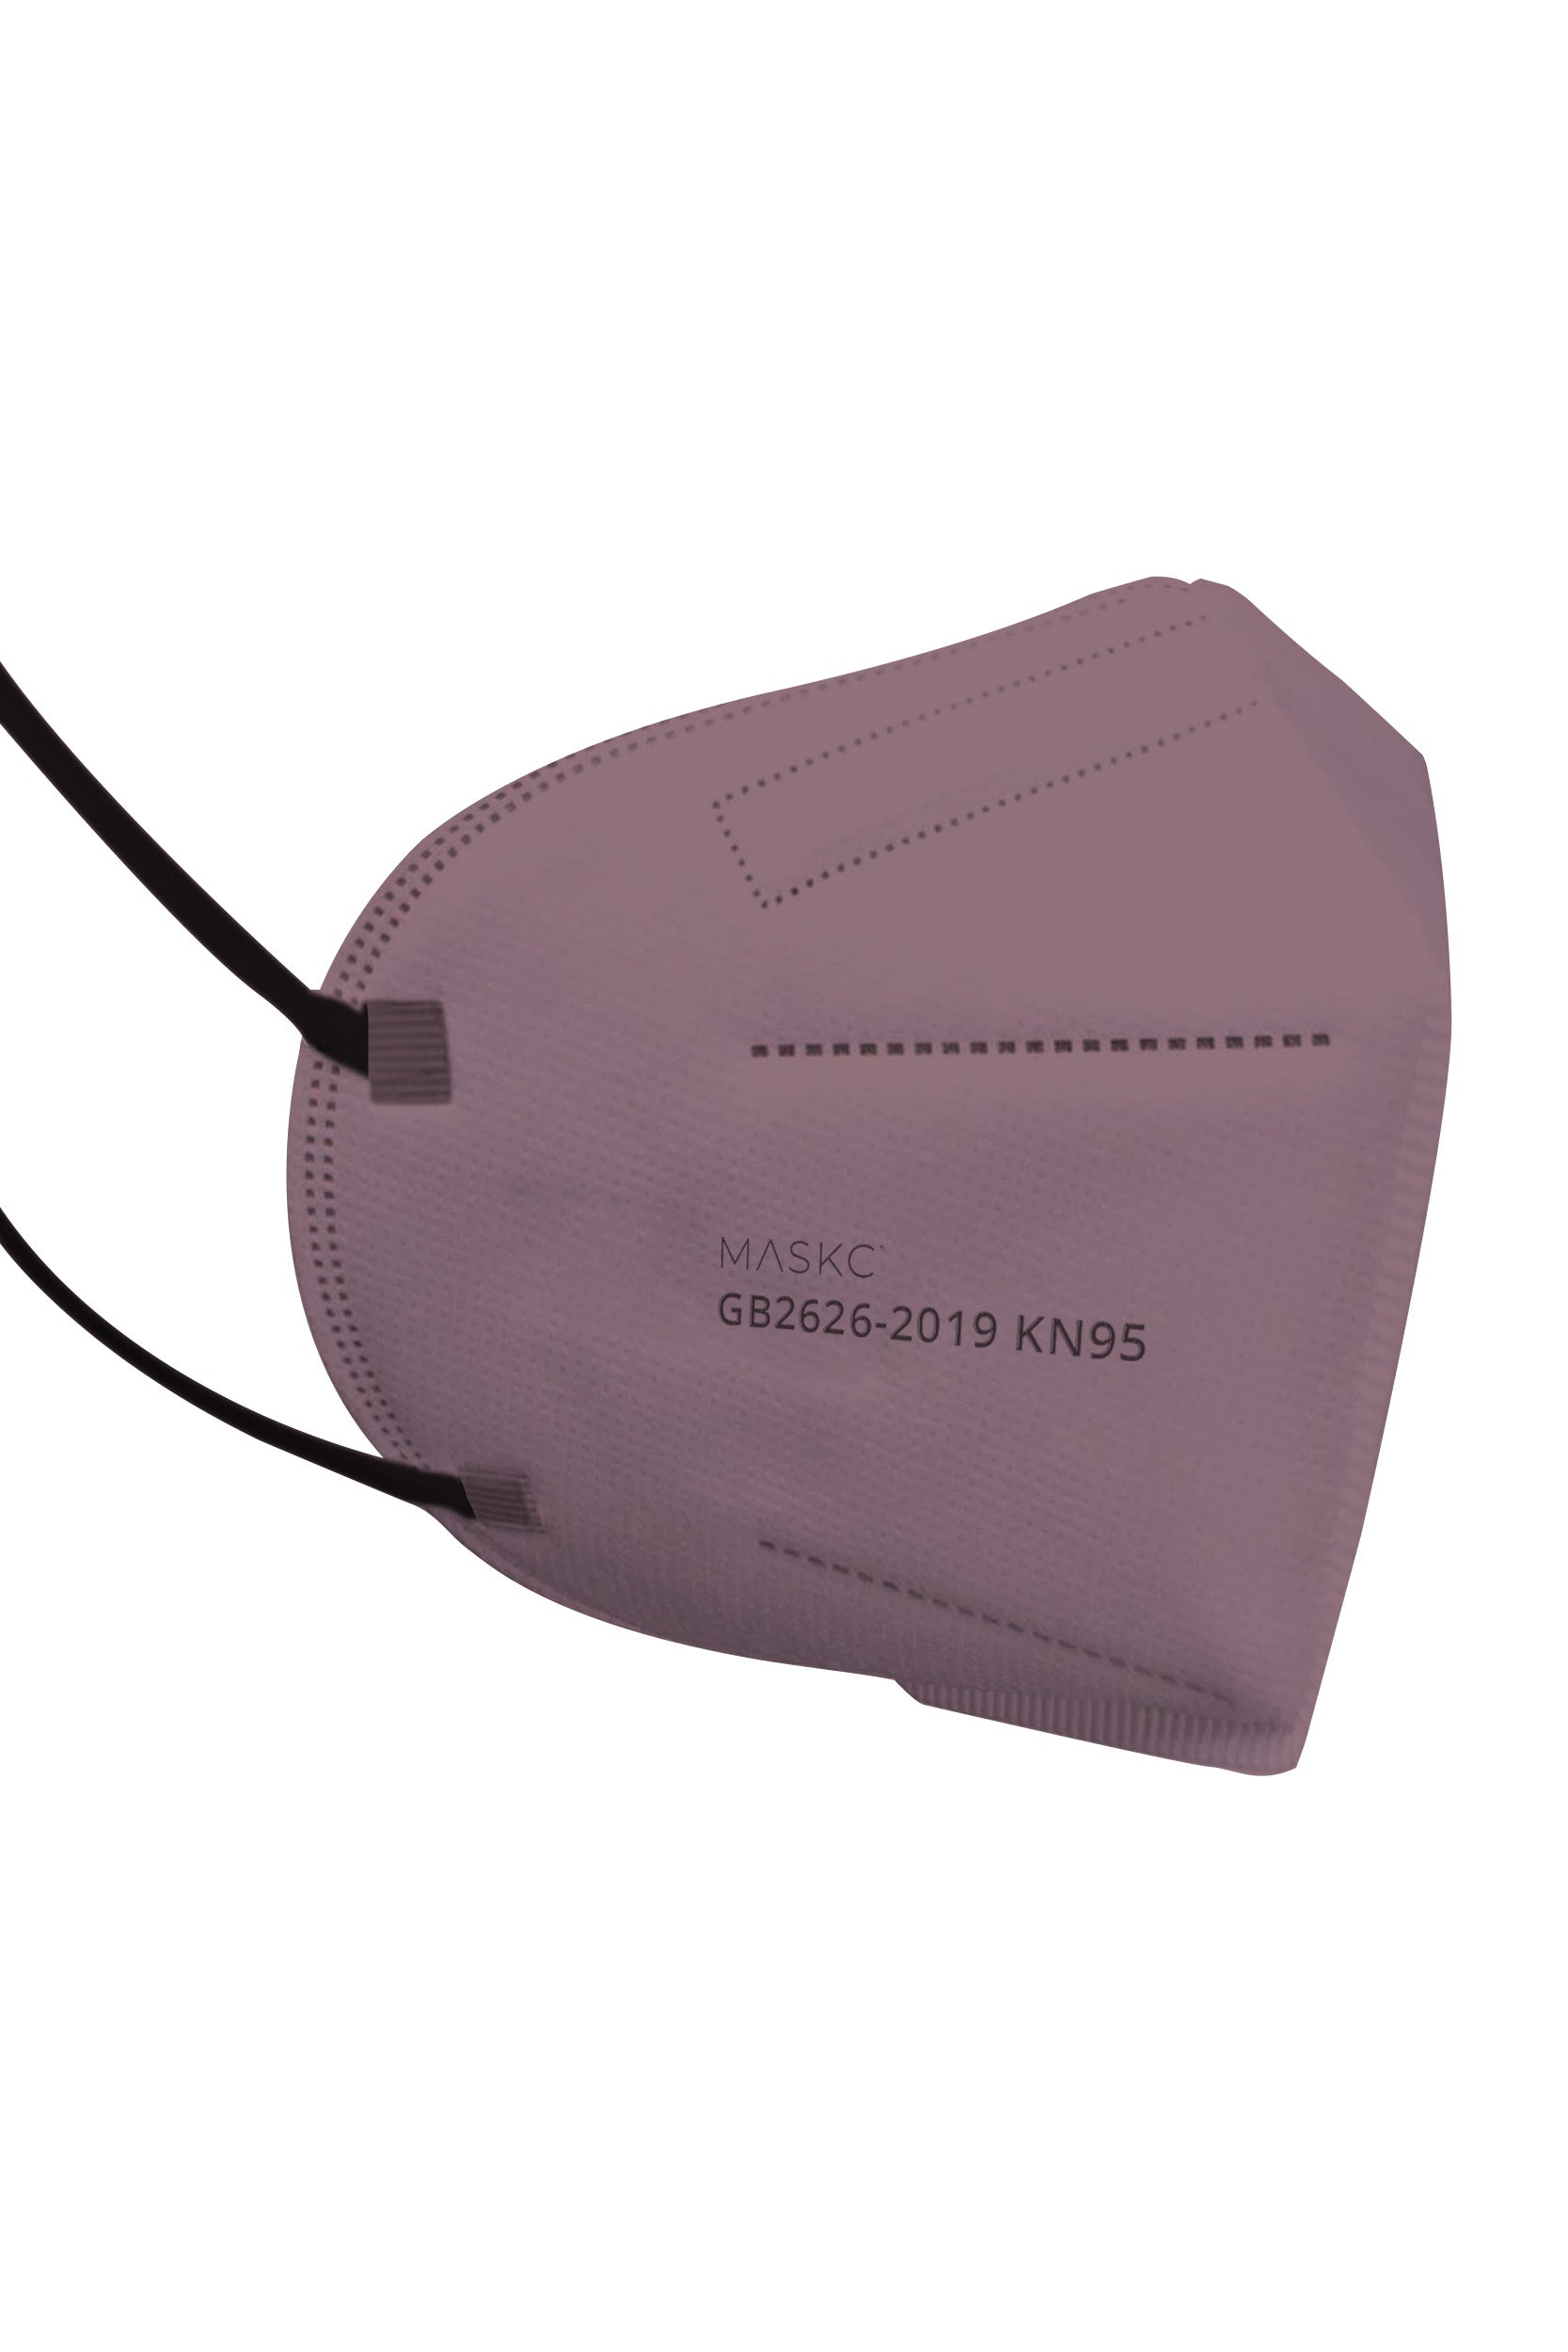 Stylish Purple KN95 face mask with printed pink hearts, with soft black ear loops and high quality fabric. 